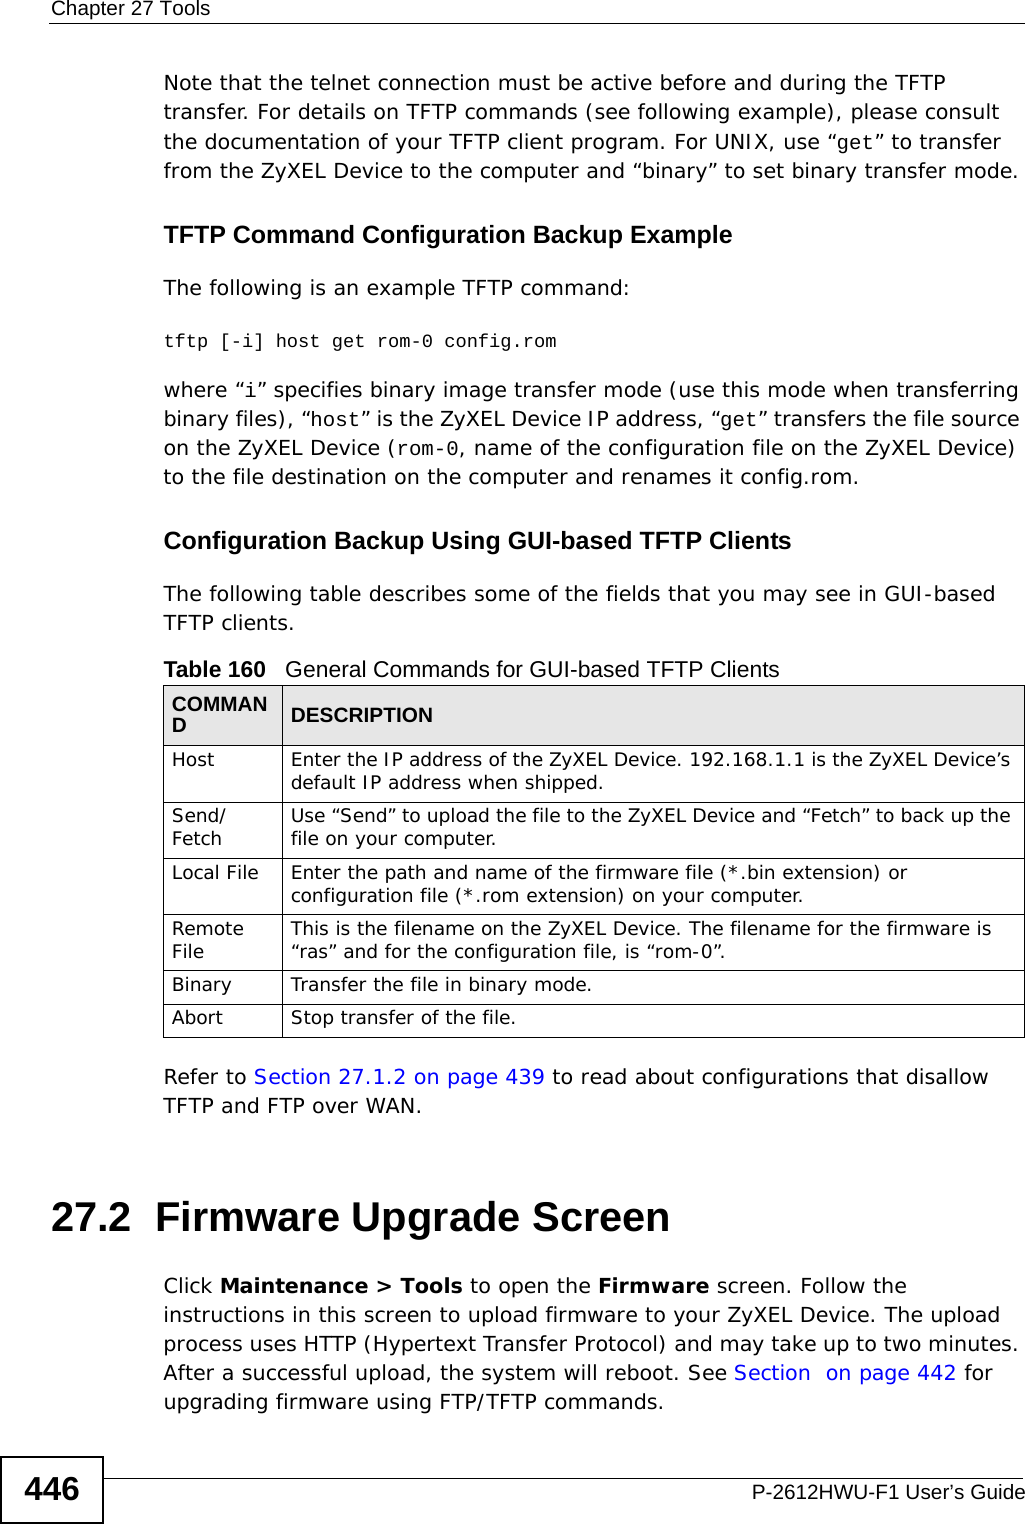 Chapter 27 ToolsP-2612HWU-F1 User’s Guide446Note that the telnet connection must be active before and during the TFTP transfer. For details on TFTP commands (see following example), please consult the documentation of your TFTP client program. For UNIX, use “get” to transfer from the ZyXEL Device to the computer and “binary” to set binary transfer mode.TFTP Command Configuration Backup ExampleThe following is an example TFTP command:tftp [-i] host get rom-0 config.romwhere “i” specifies binary image transfer mode (use this mode when transferring binary files), “host” is the ZyXEL Device IP address, “get” transfers the file source on the ZyXEL Device (rom-0, name of the configuration file on the ZyXEL Device) to the file destination on the computer and renames it config.rom.Configuration Backup Using GUI-based TFTP ClientsThe following table describes some of the fields that you may see in GUI-based TFTP clients.Refer to Section 27.1.2 on page 439 to read about configurations that disallow TFTP and FTP over WAN.27.2  Firmware Upgrade Screen   Click Maintenance &gt; Tools to open the Firmware screen. Follow the instructions in this screen to upload firmware to your ZyXEL Device. The upload process uses HTTP (Hypertext Transfer Protocol) and may take up to two minutes. After a successful upload, the system will reboot. See Section  on page 442 for upgrading firmware using FTP/TFTP commands.Table 160   General Commands for GUI-based TFTP ClientsCOMMANDDESCRIPTIONHost Enter the IP address of the ZyXEL Device. 192.168.1.1 is the ZyXEL Device’s default IP address when shipped.Send/Fetch Use “Send” to upload the file to the ZyXEL Device and “Fetch” to back up the file on your computer. Local File Enter the path and name of the firmware file (*.bin extension) or configuration file (*.rom extension) on your computer.Remote File This is the filename on the ZyXEL Device. The filename for the firmware is “ras” and for the configuration file, is “rom-0”.Binary Transfer the file in binary mode.Abort Stop transfer of the file.